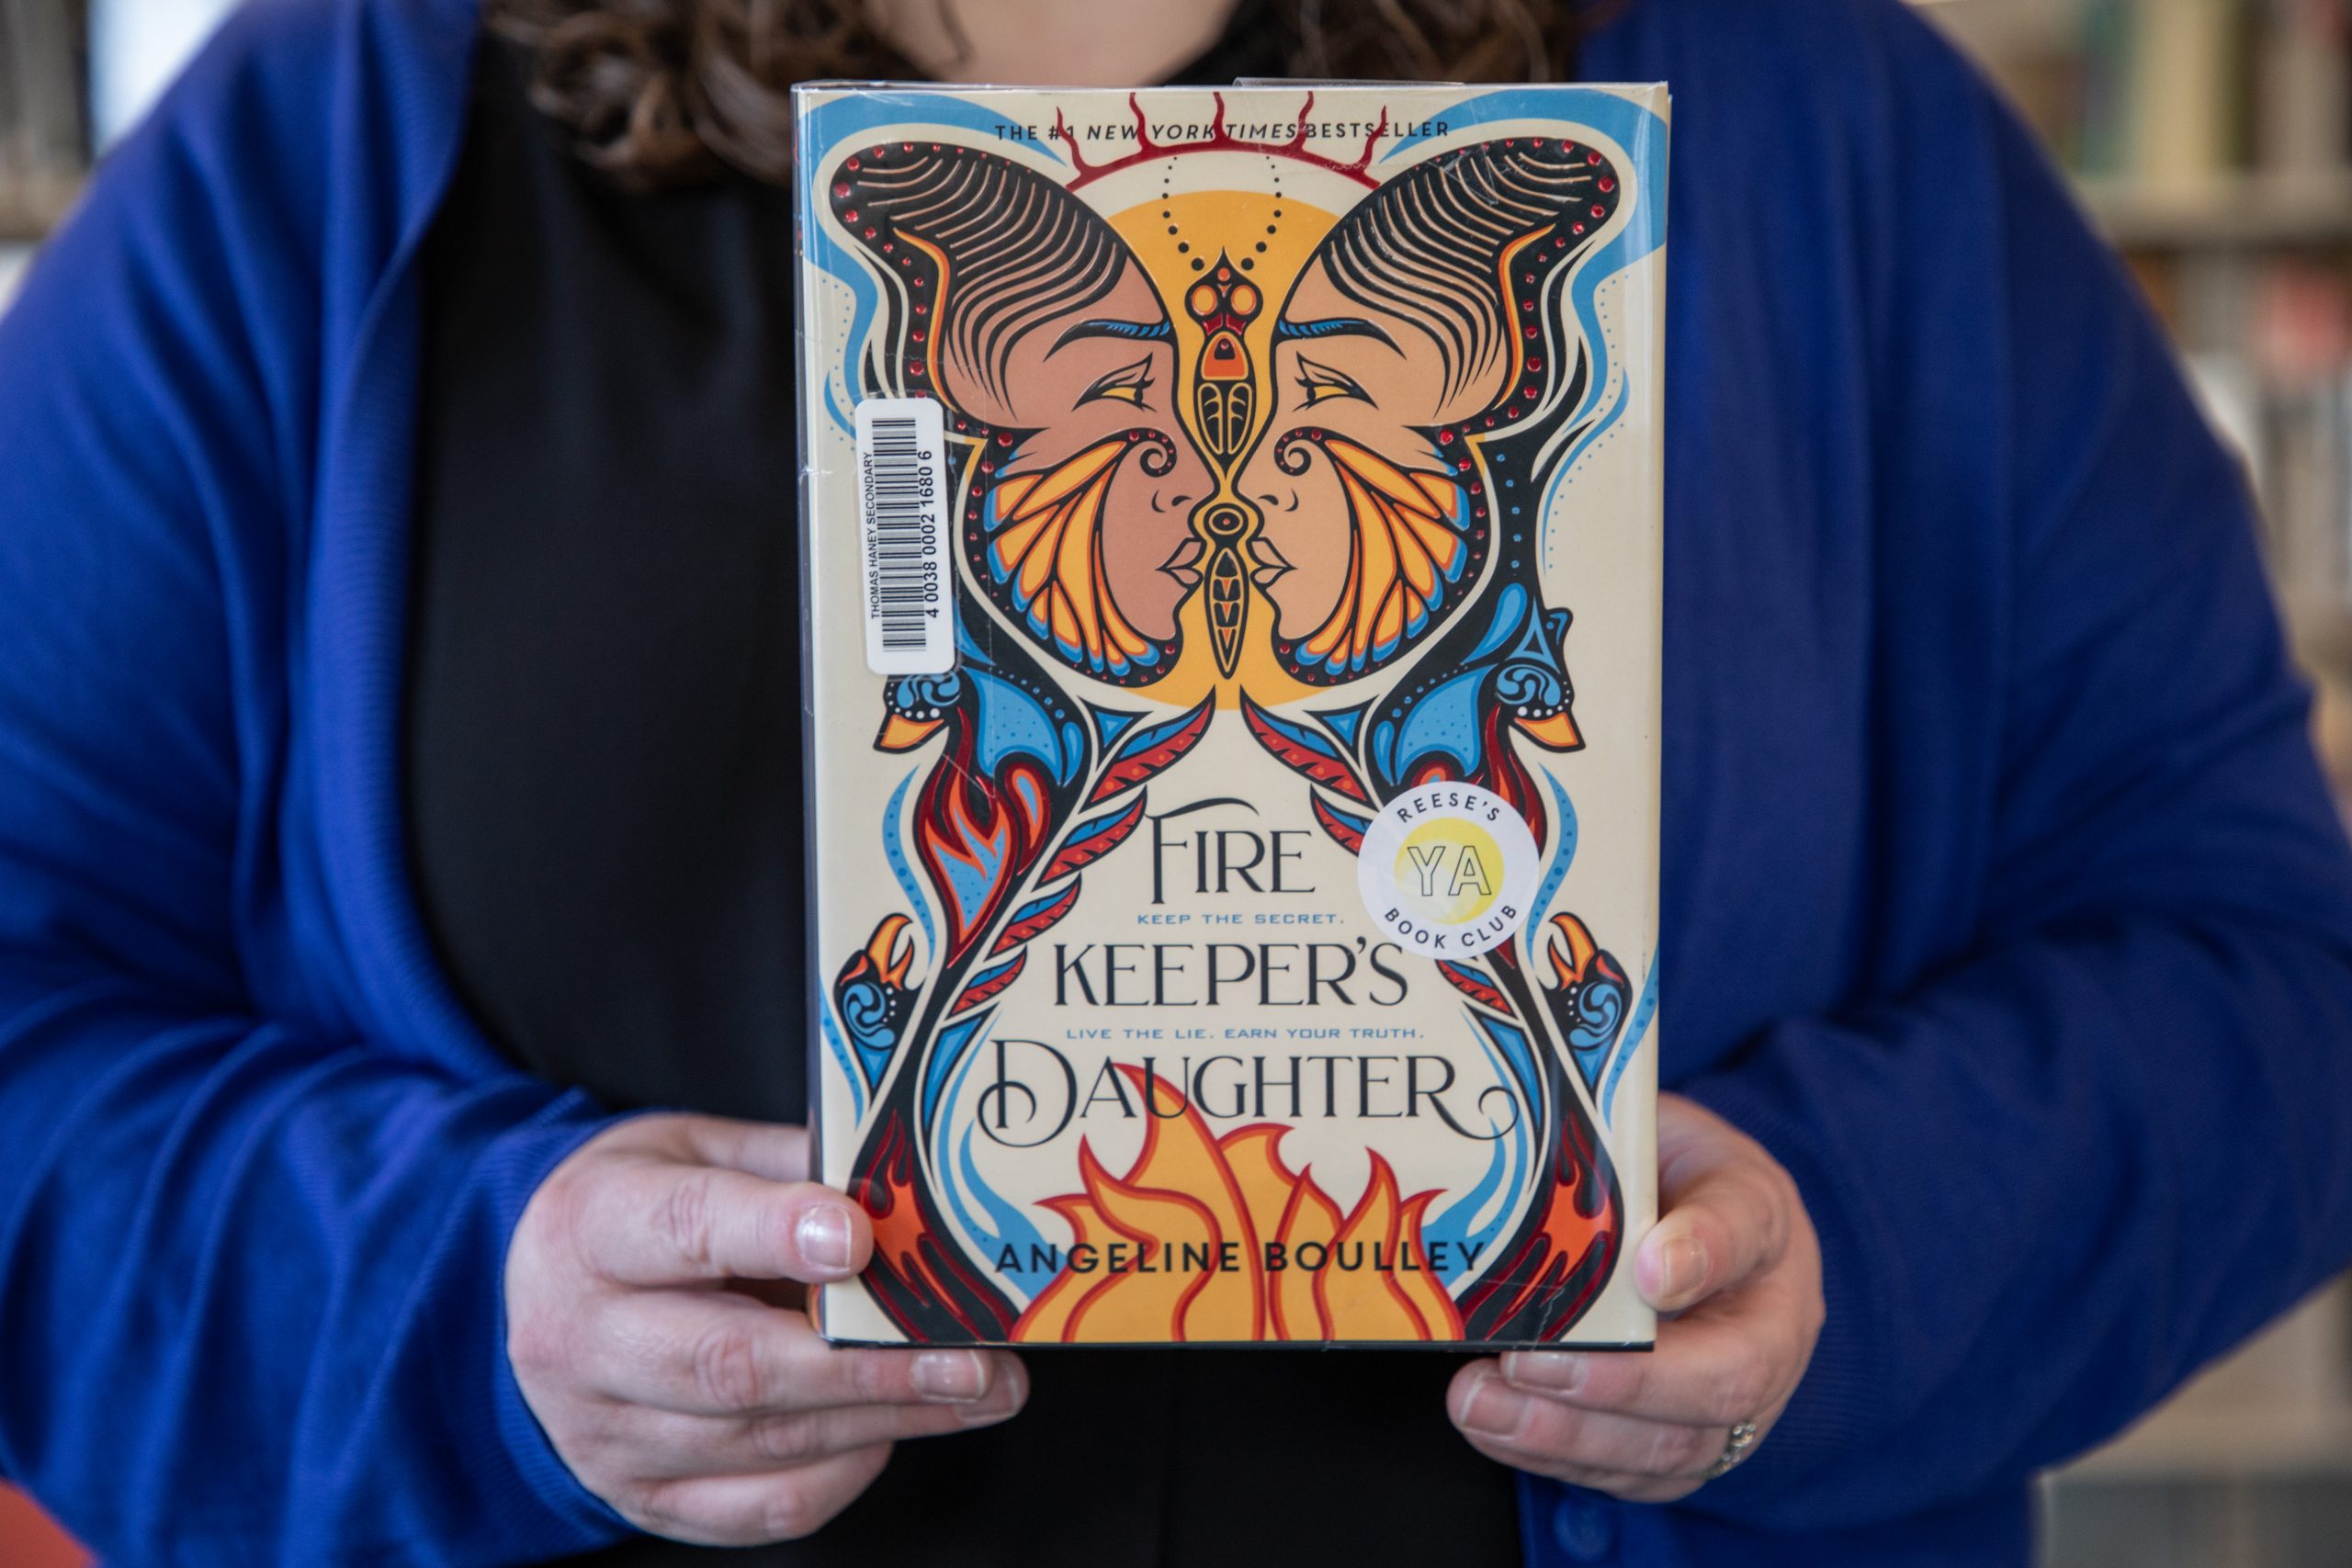 "Firekeeper’s Daughter" by Angeline Boulley.